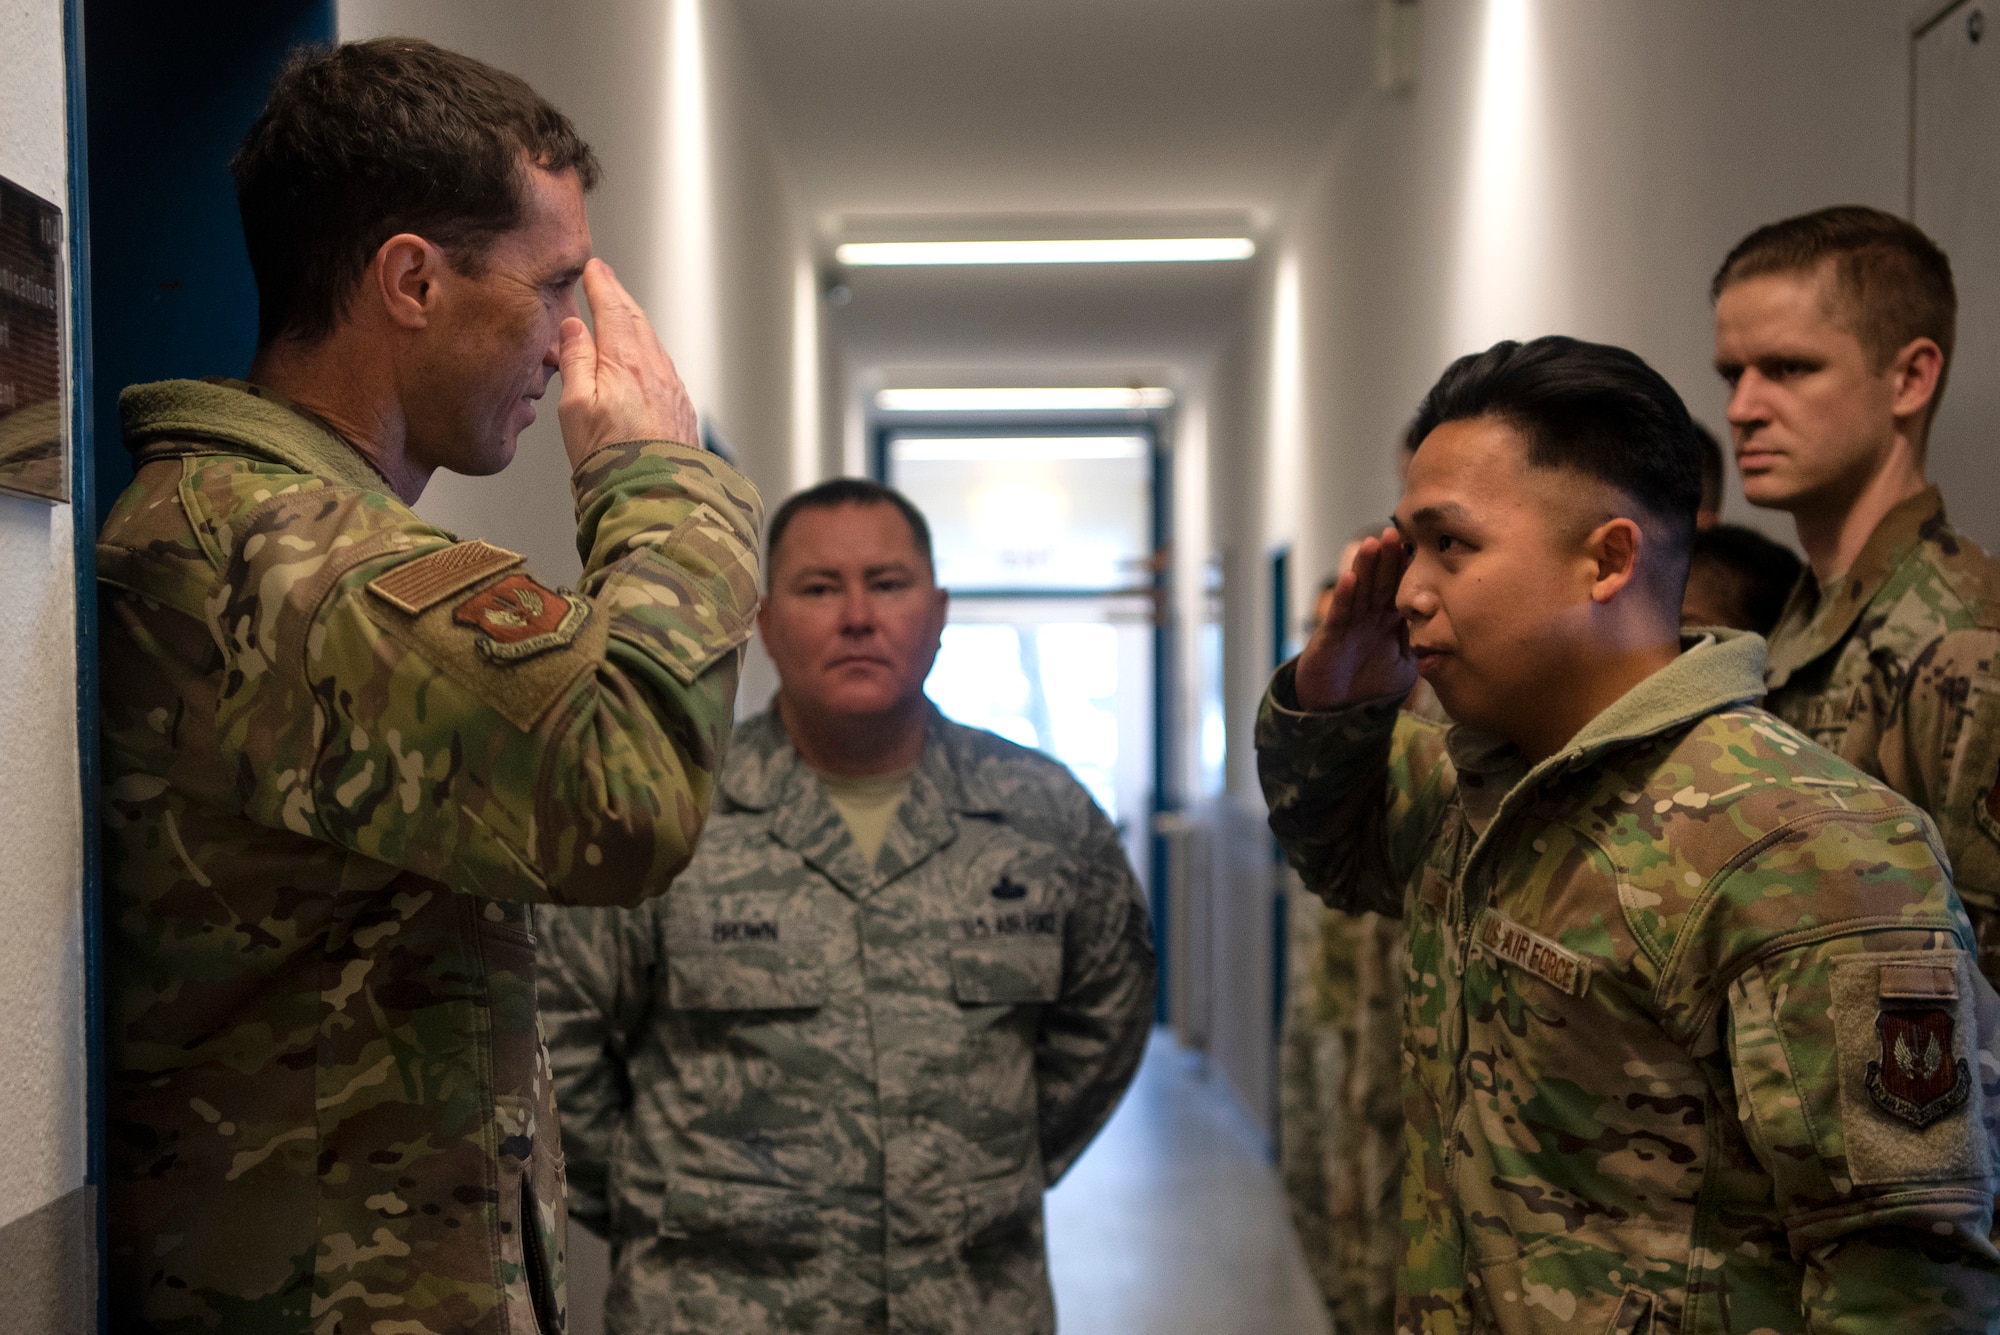 U.S. Air Force Col. David Epperson, 52nd Fighter Wing commander, left, and Senior Airman John Sierra, 702nd Munitions Support Squadron radio frequency transmission system technician, front right, render a salute at Buechel Air Base, Germany, Dec. 5, 2019, during a commander immersion tour. Epperson presented a coin to Sierra and several other Airmen in the squadron for their outstanding performance. (U.S. Air Force photo by Airman 1st Class Valerie Seelye)